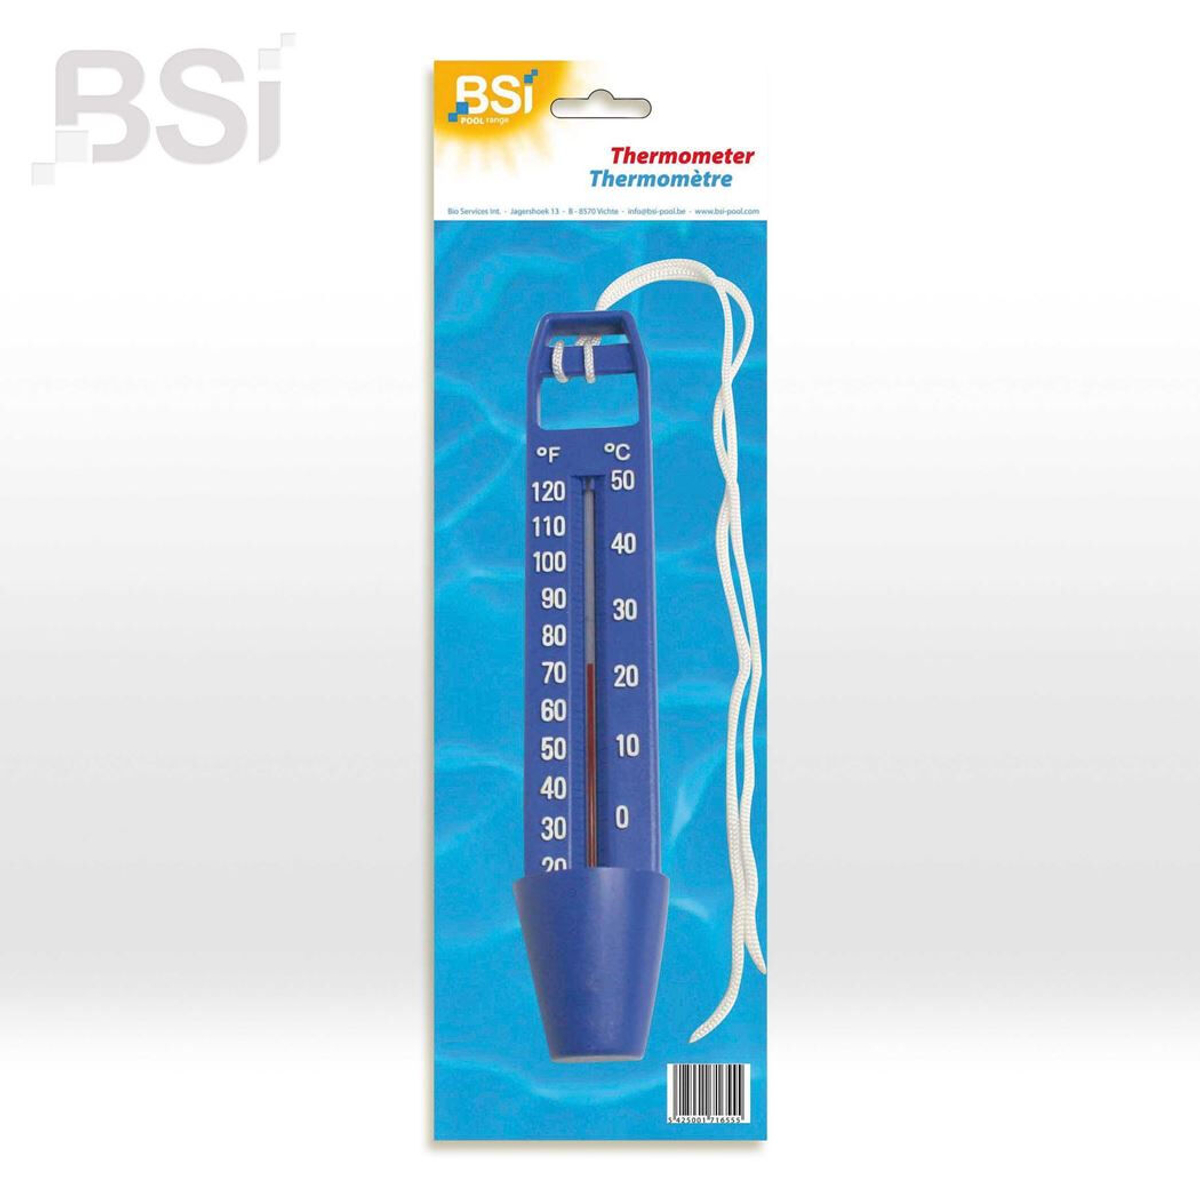 BSI Thermometer